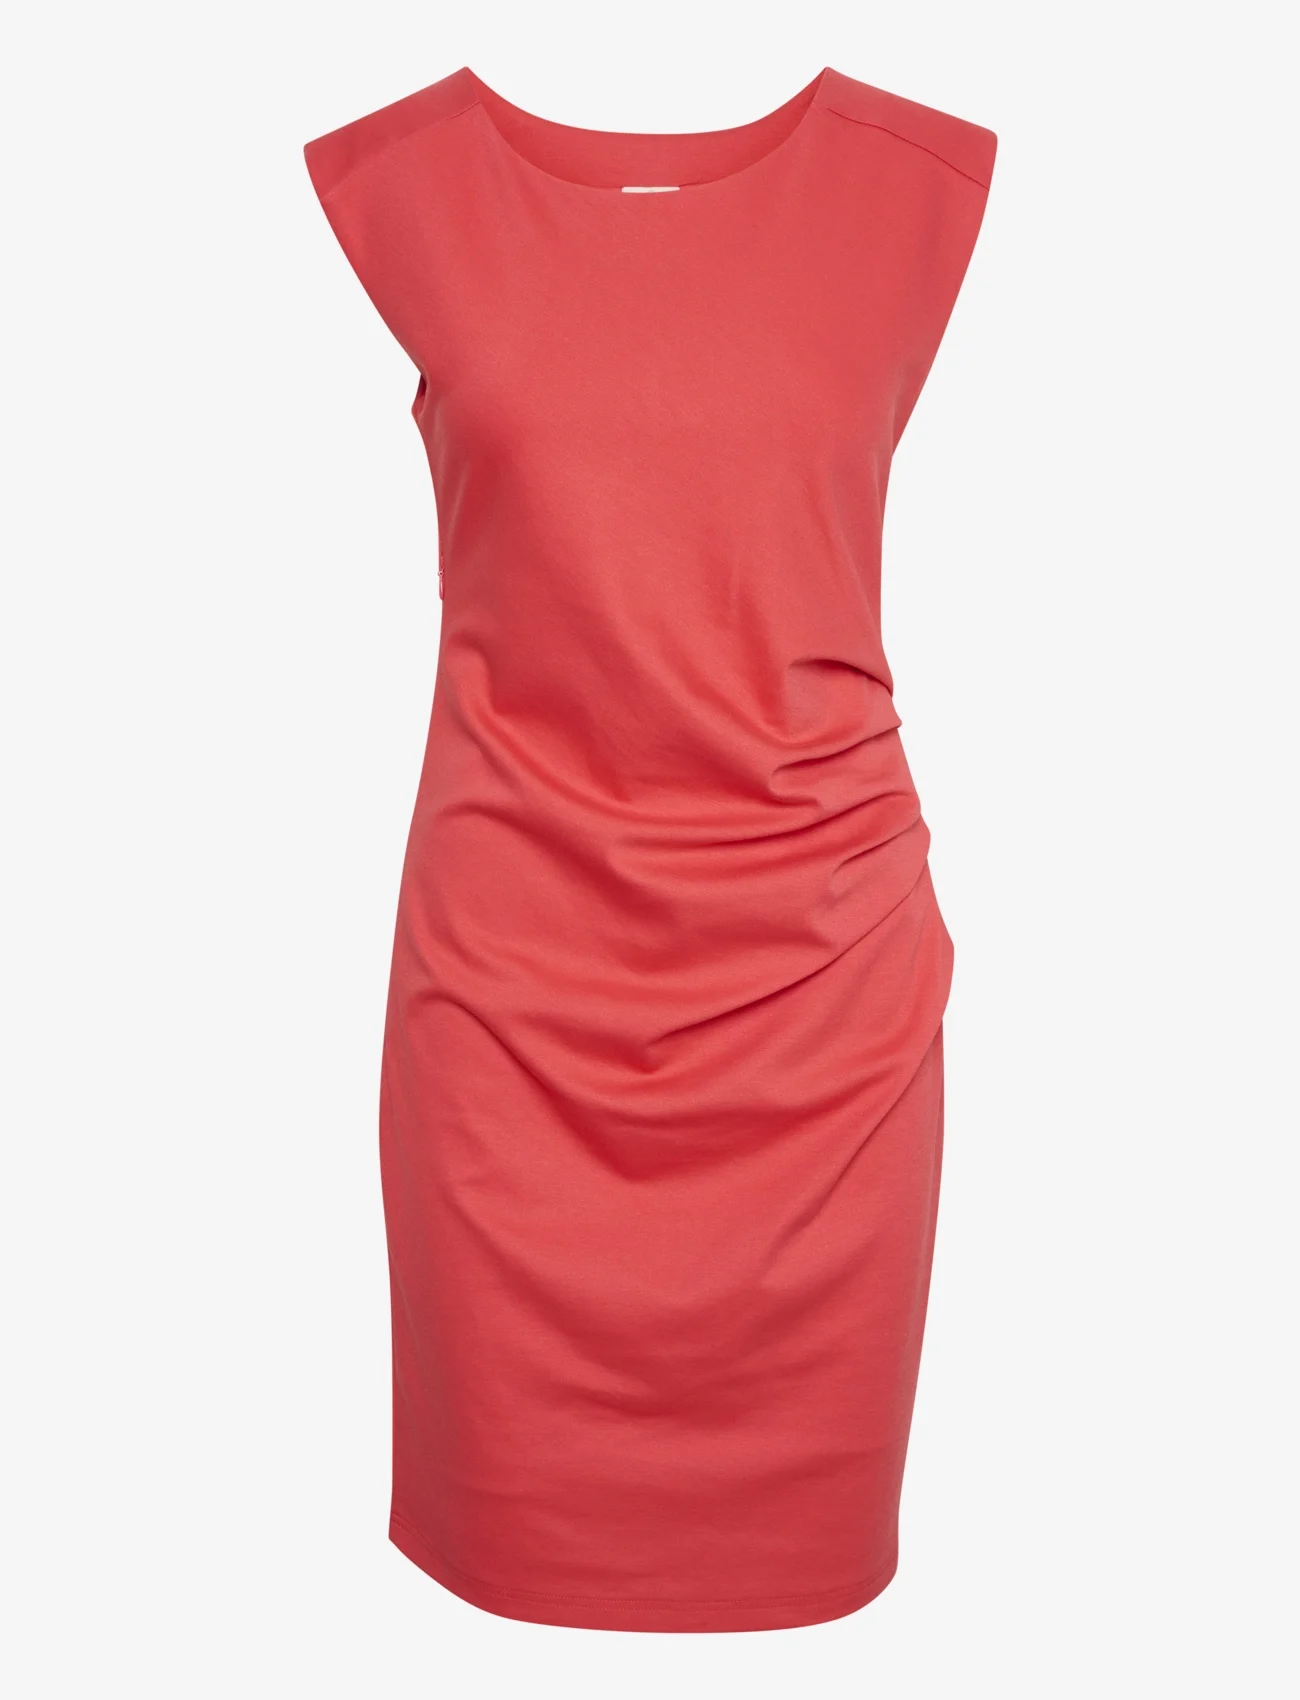 Kaffe - KAindia Round-Neck Dress - party wear at outlet prices - cayenne - 0